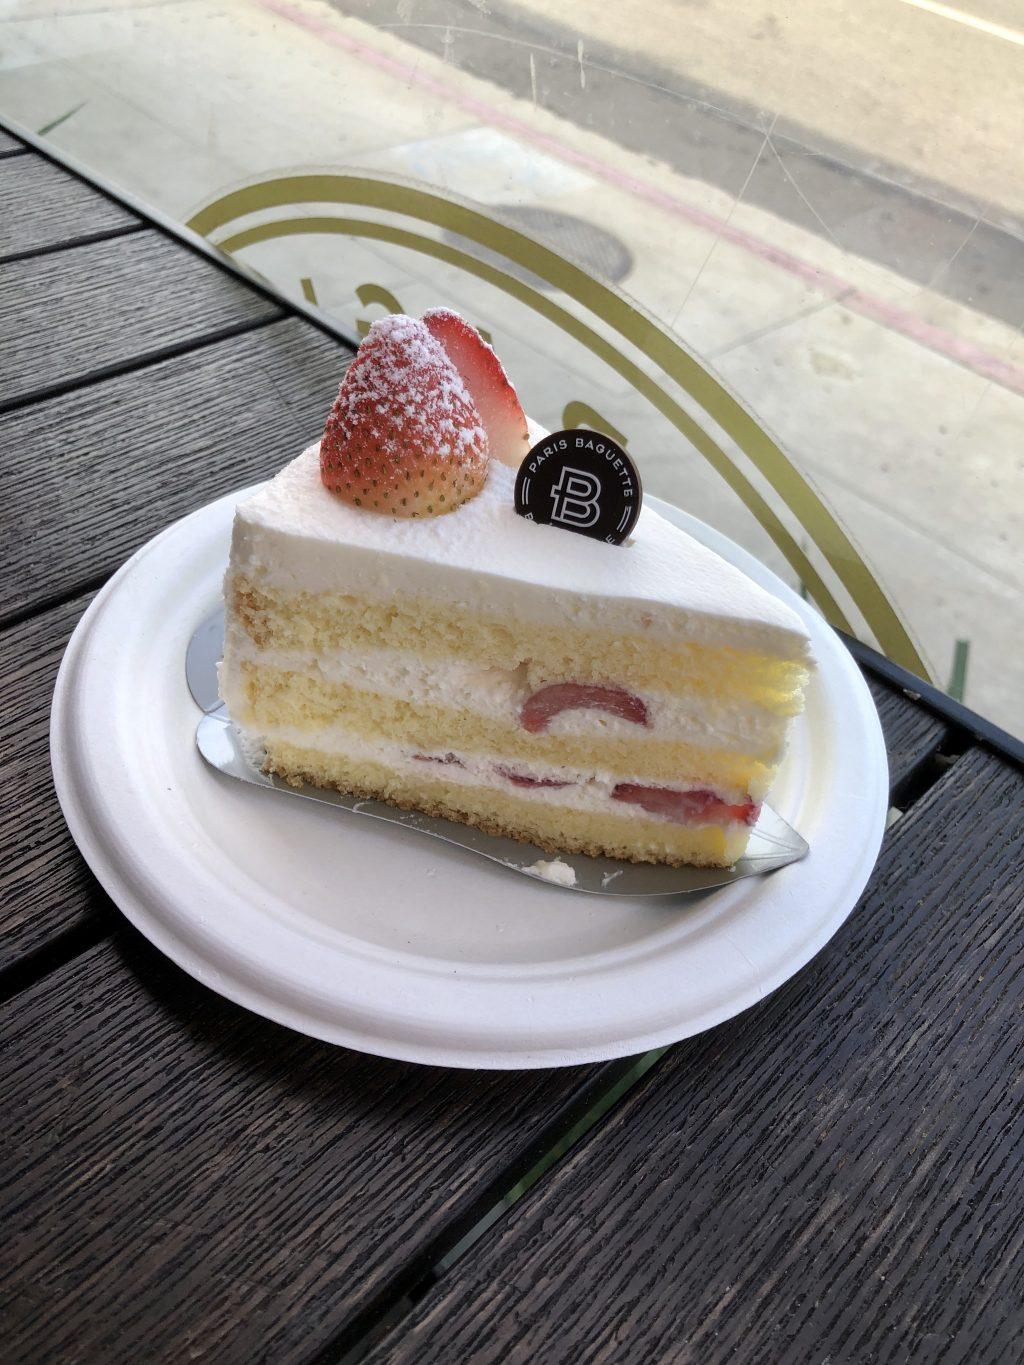 A slice of strawberry soft cream cake sits on a table. My parents bought me this cake every year for my birthday.